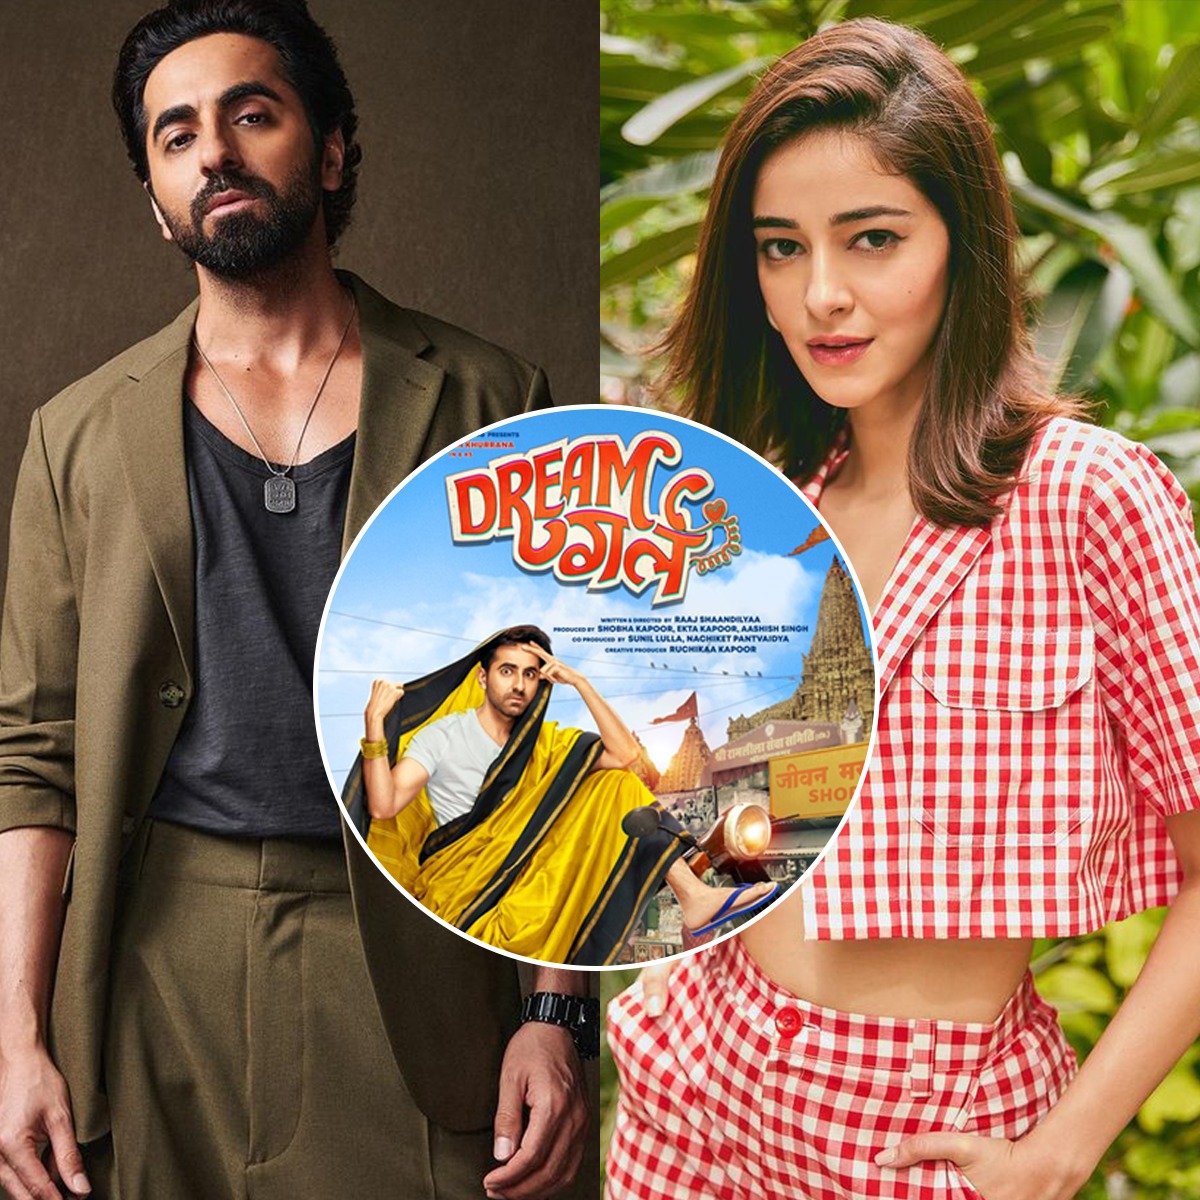 Exclusive: Ananya Panday to play Ayushmann Khurrana's 'Dream Girl' in the sequel